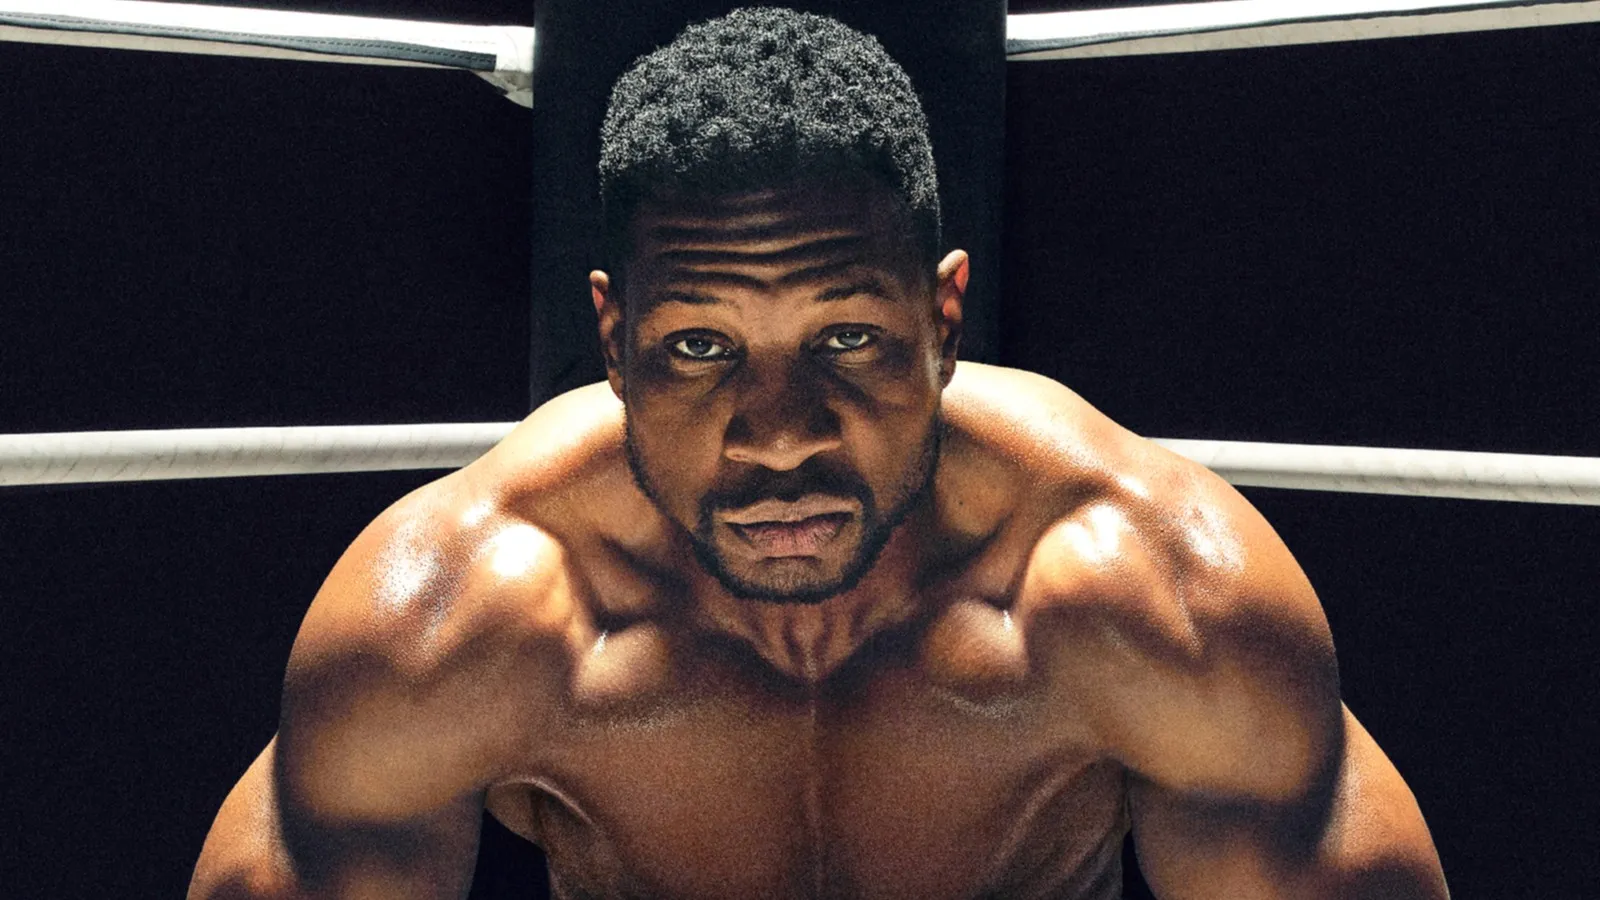 Was Jonathan Majors' 'Creed III' Character Introduced in The First Movie?